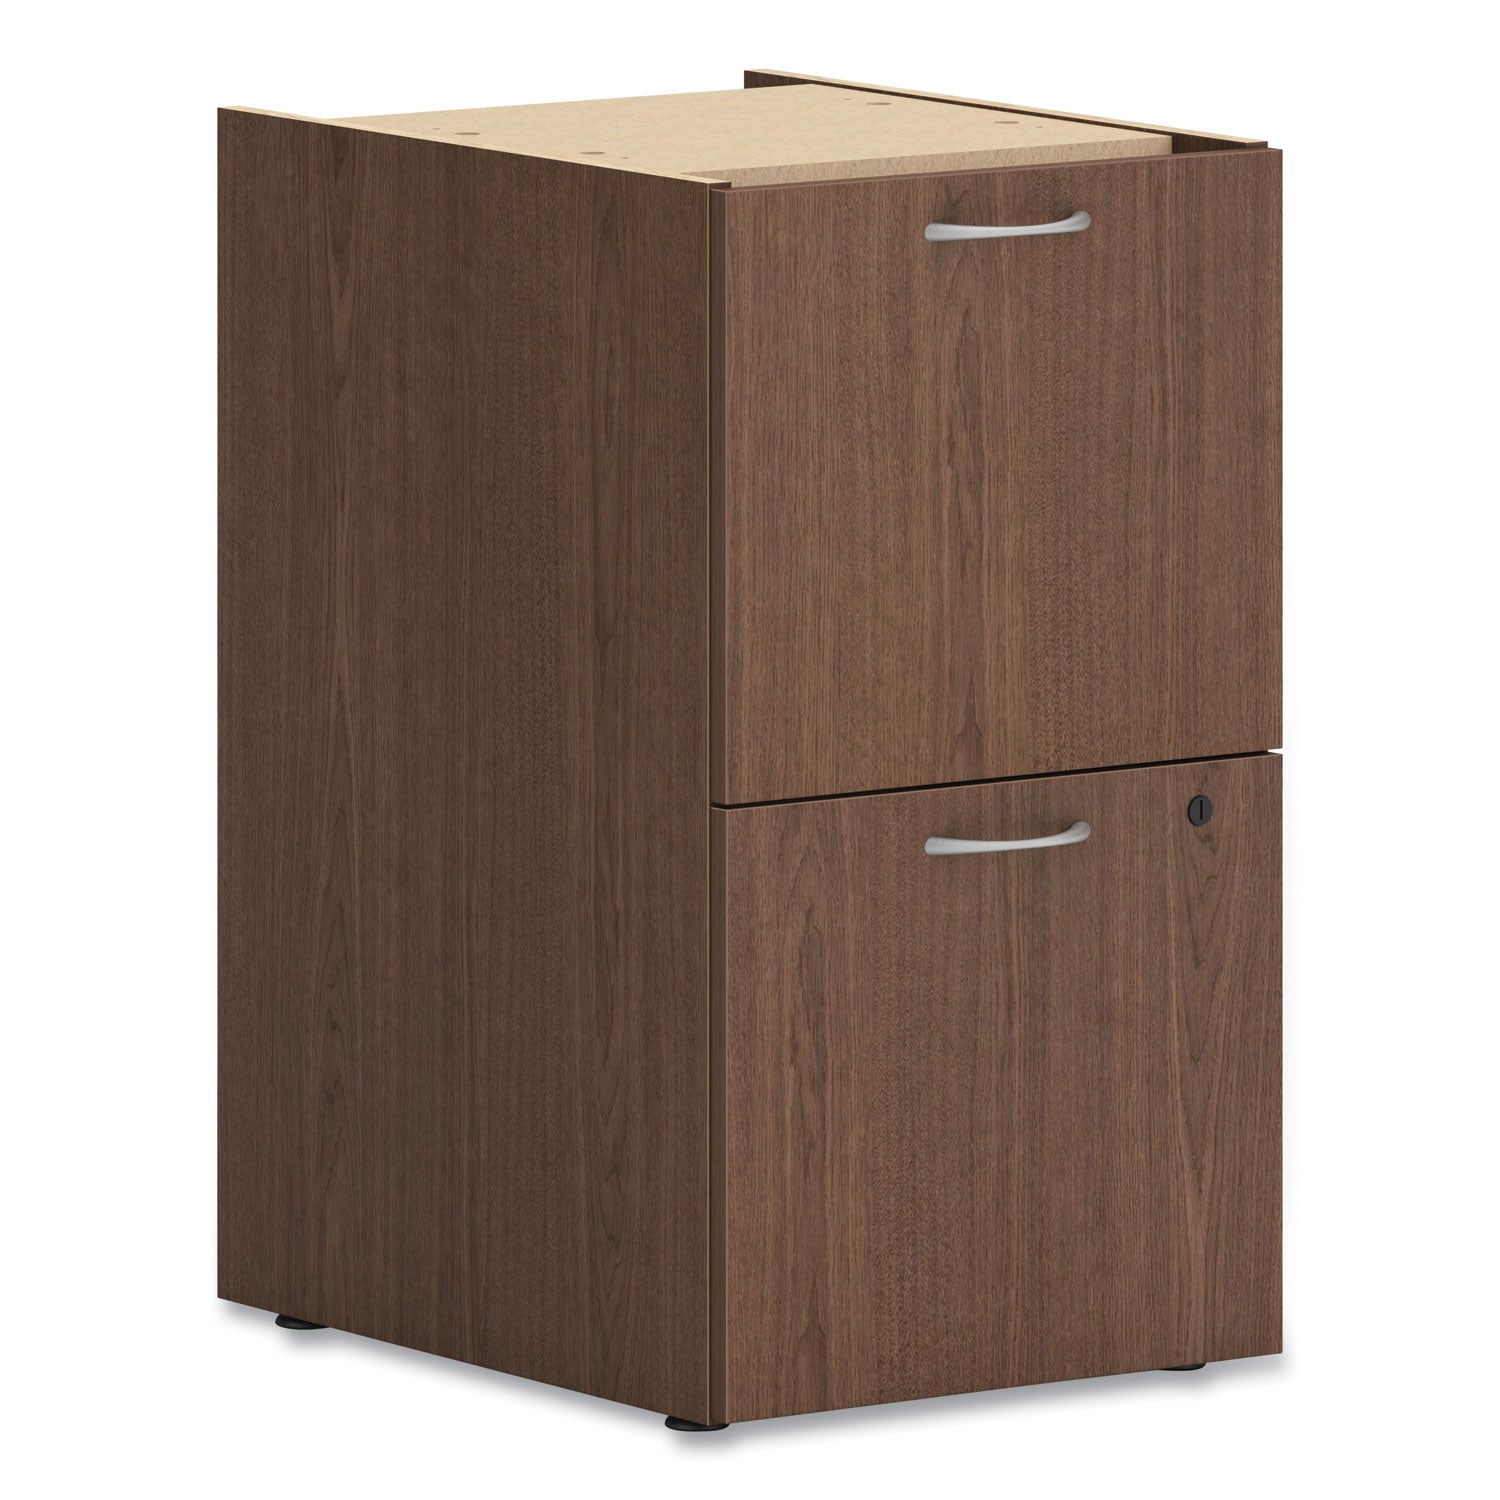 mod-support-pedestal-left-or-right-2-legal-letter-size-file-drawers-sepia-walnut-15-x-20-x-28_honplpsffle1 - 1